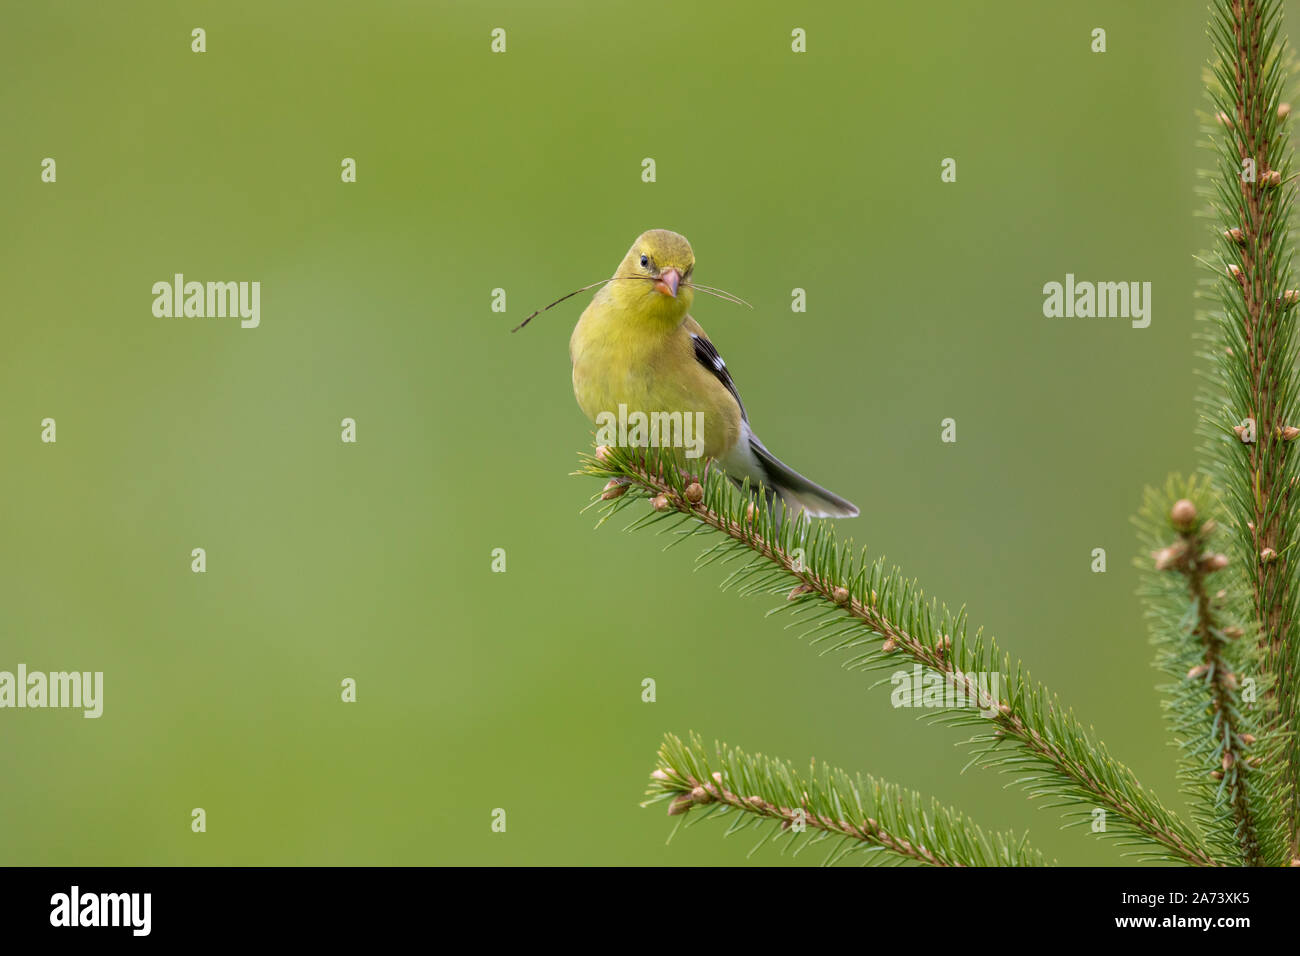 Female American goldfinch holding a pine needle in her beak. Stock Photo